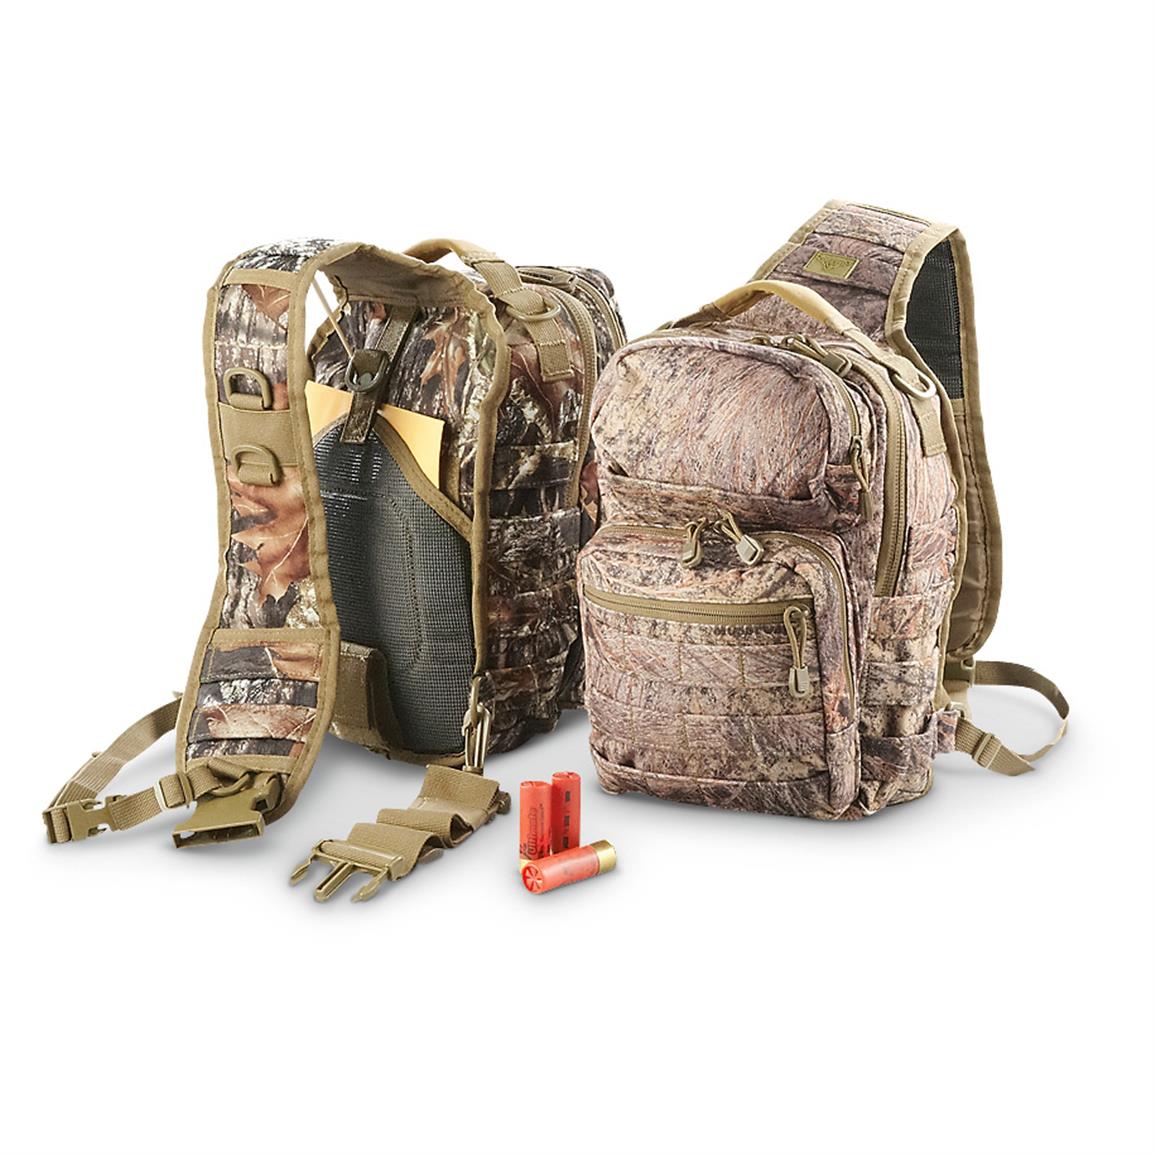 Red Rock Outdoor Gear Mossy Oak Rover Sling Bag - 594607, Hunting ...